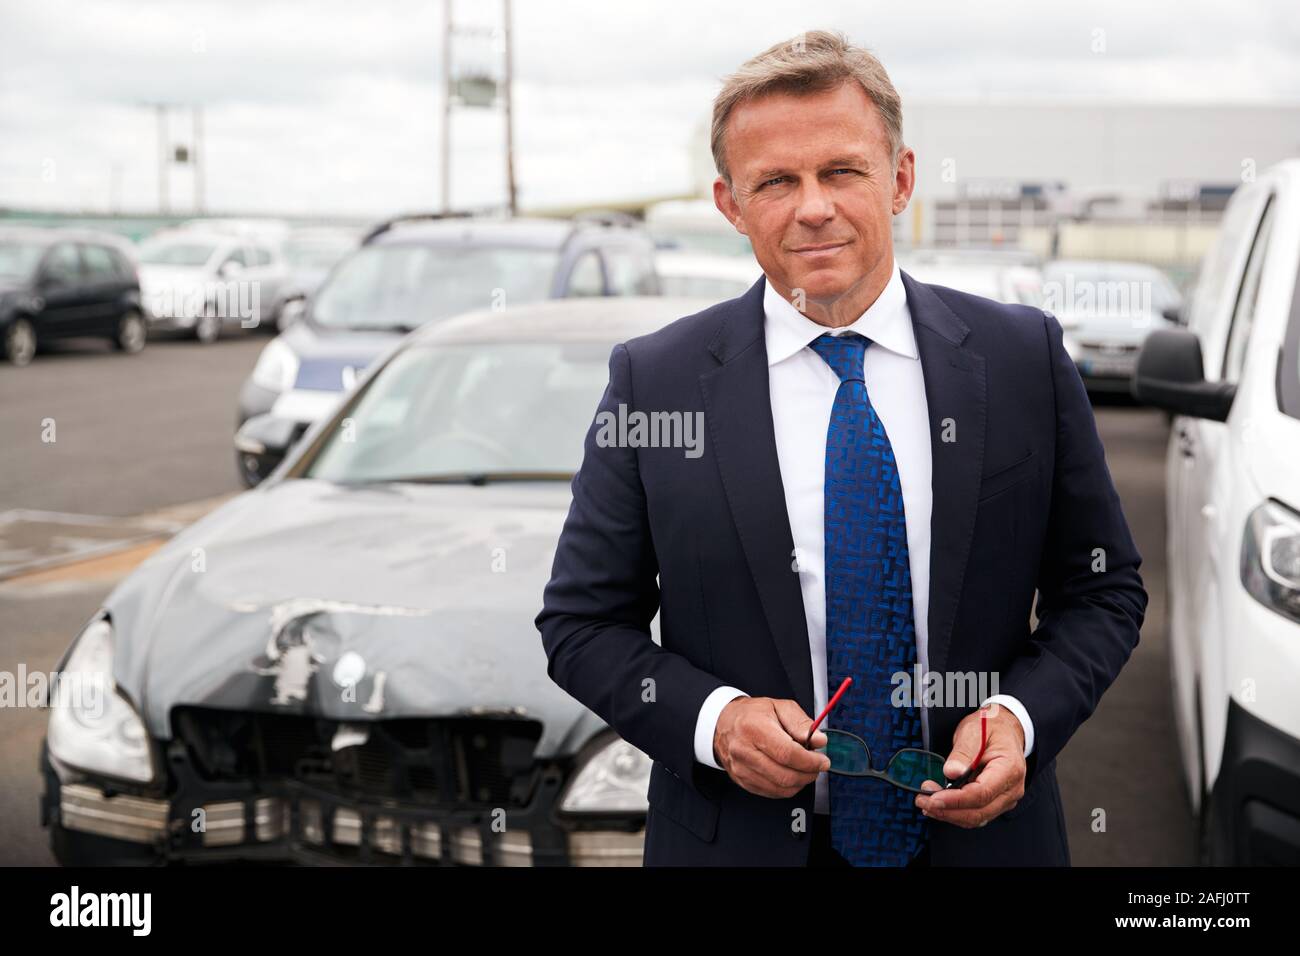 Portrait Of Insurance Loss Adjuster Inspecting Damage To Car From Motor Accident Stock Photo